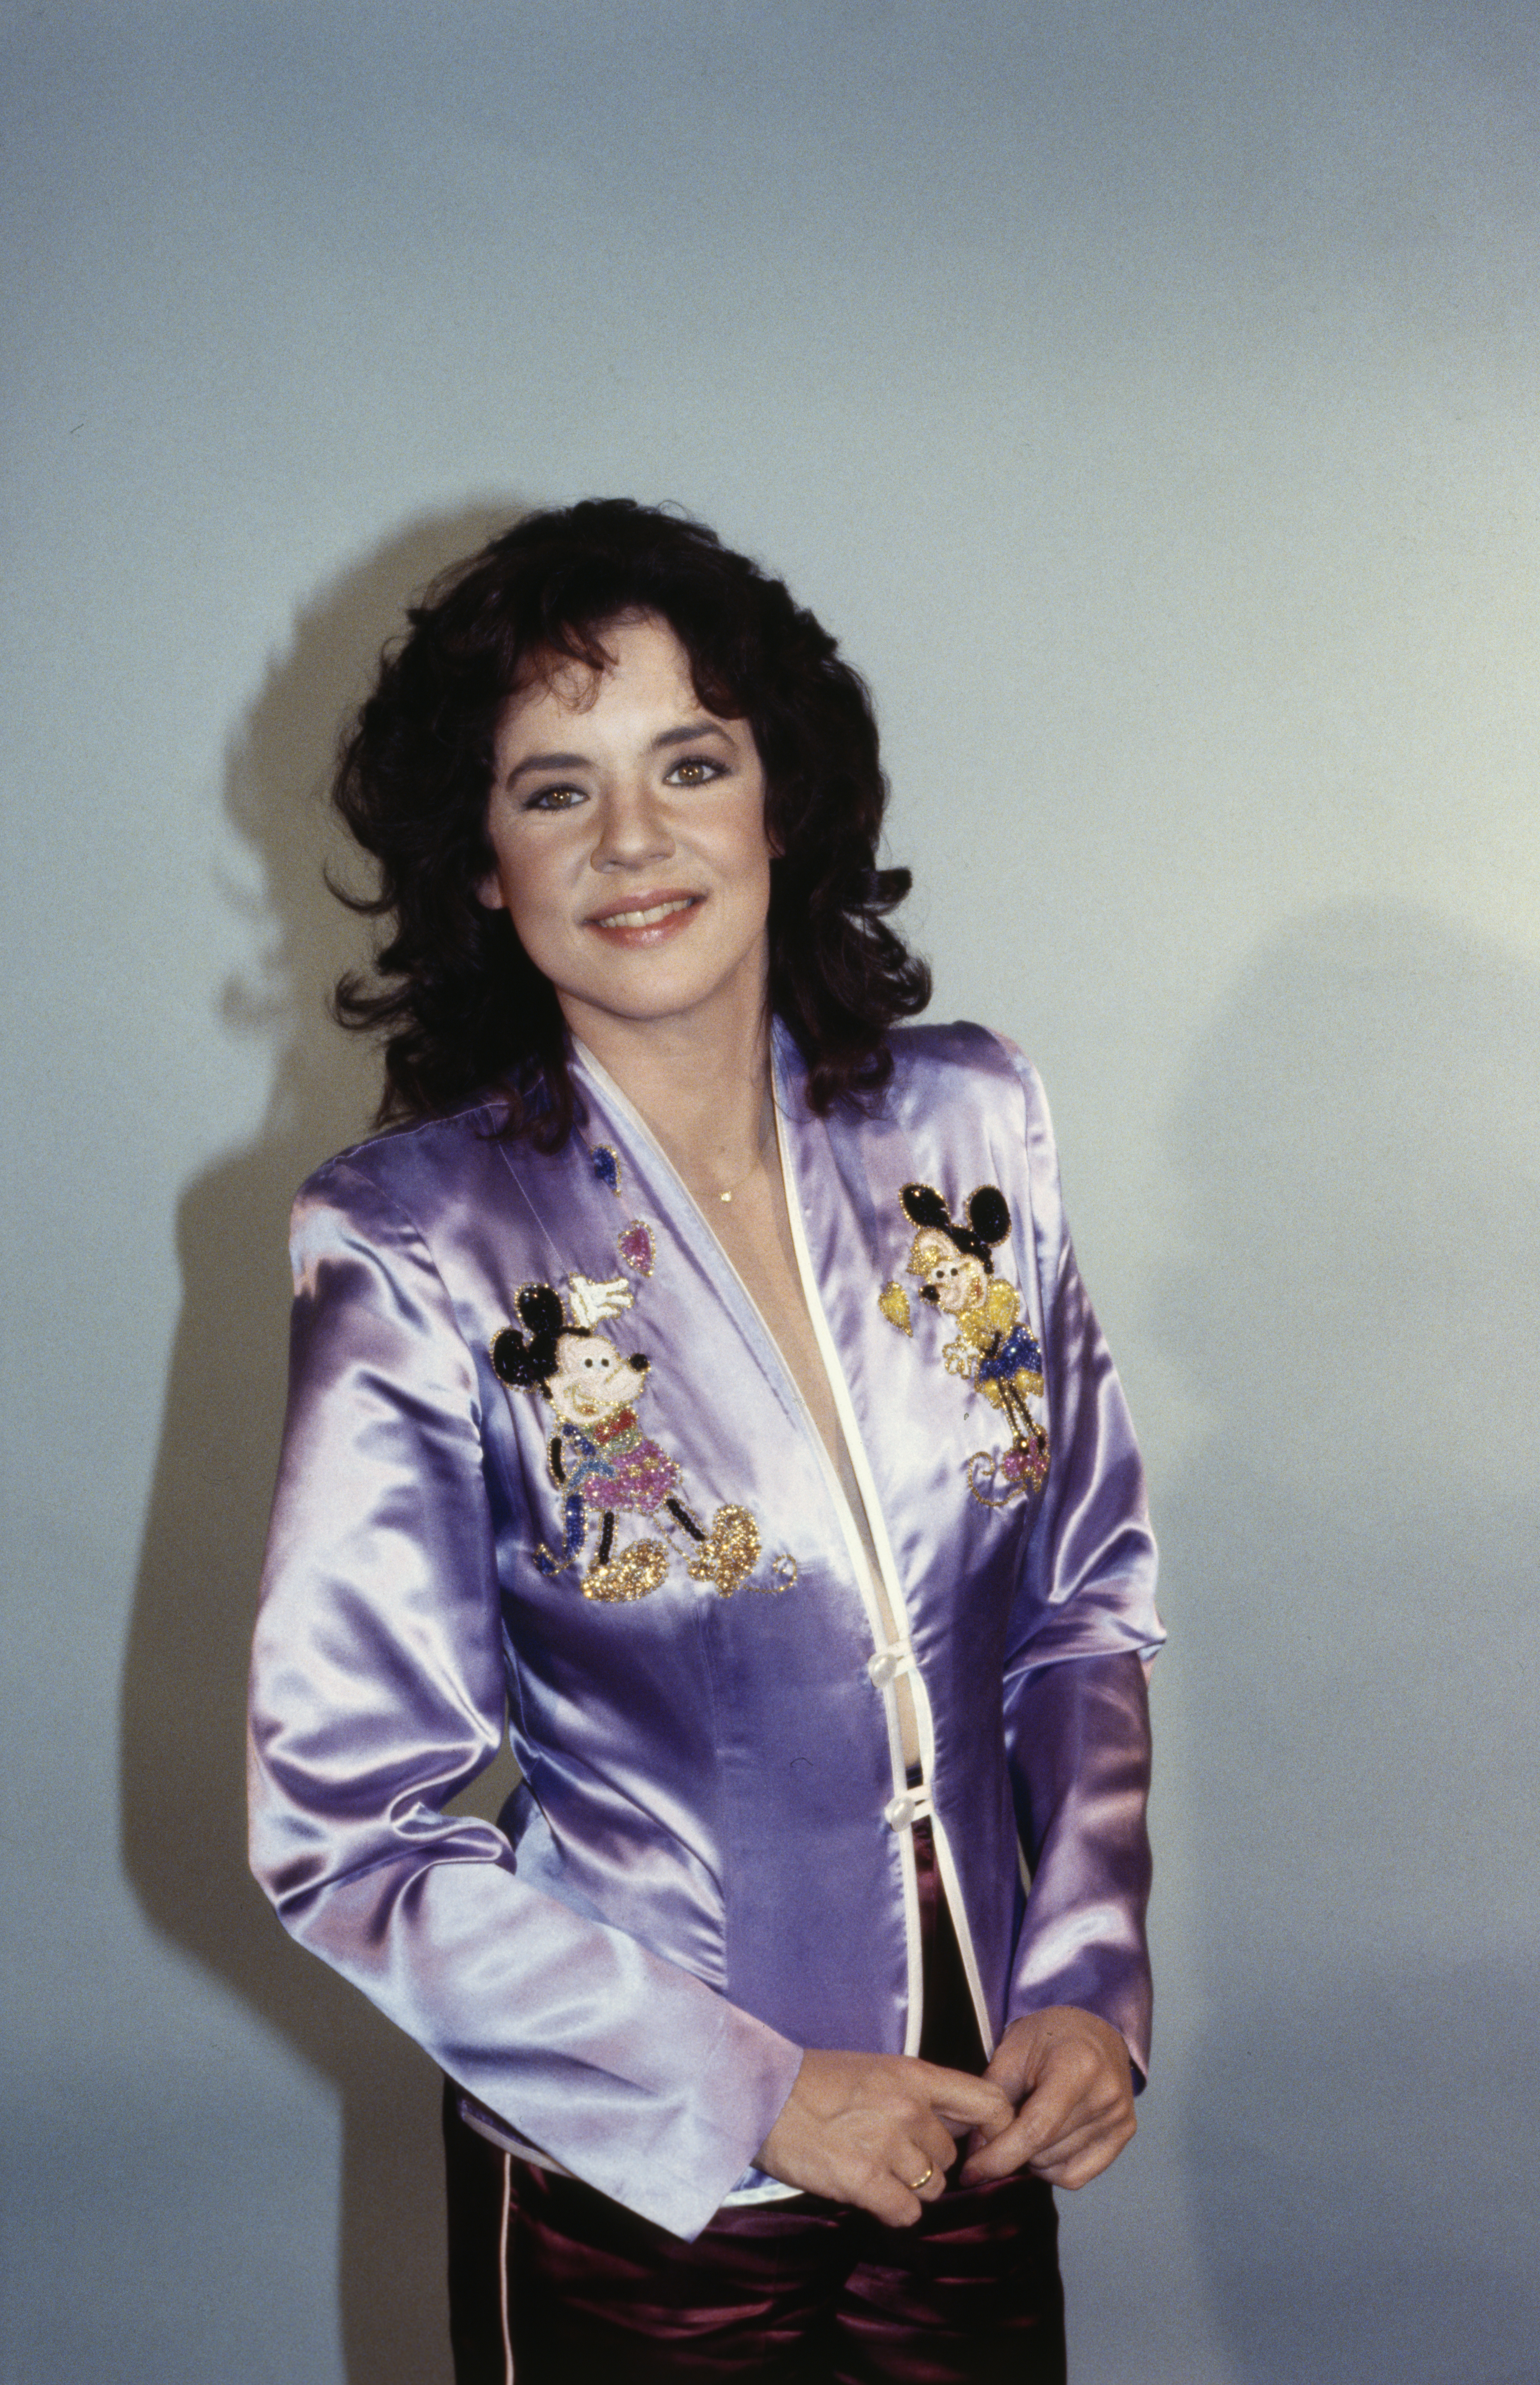 Stockard in a satin blazer with Mickey Mouse motifs, smiling at the camera